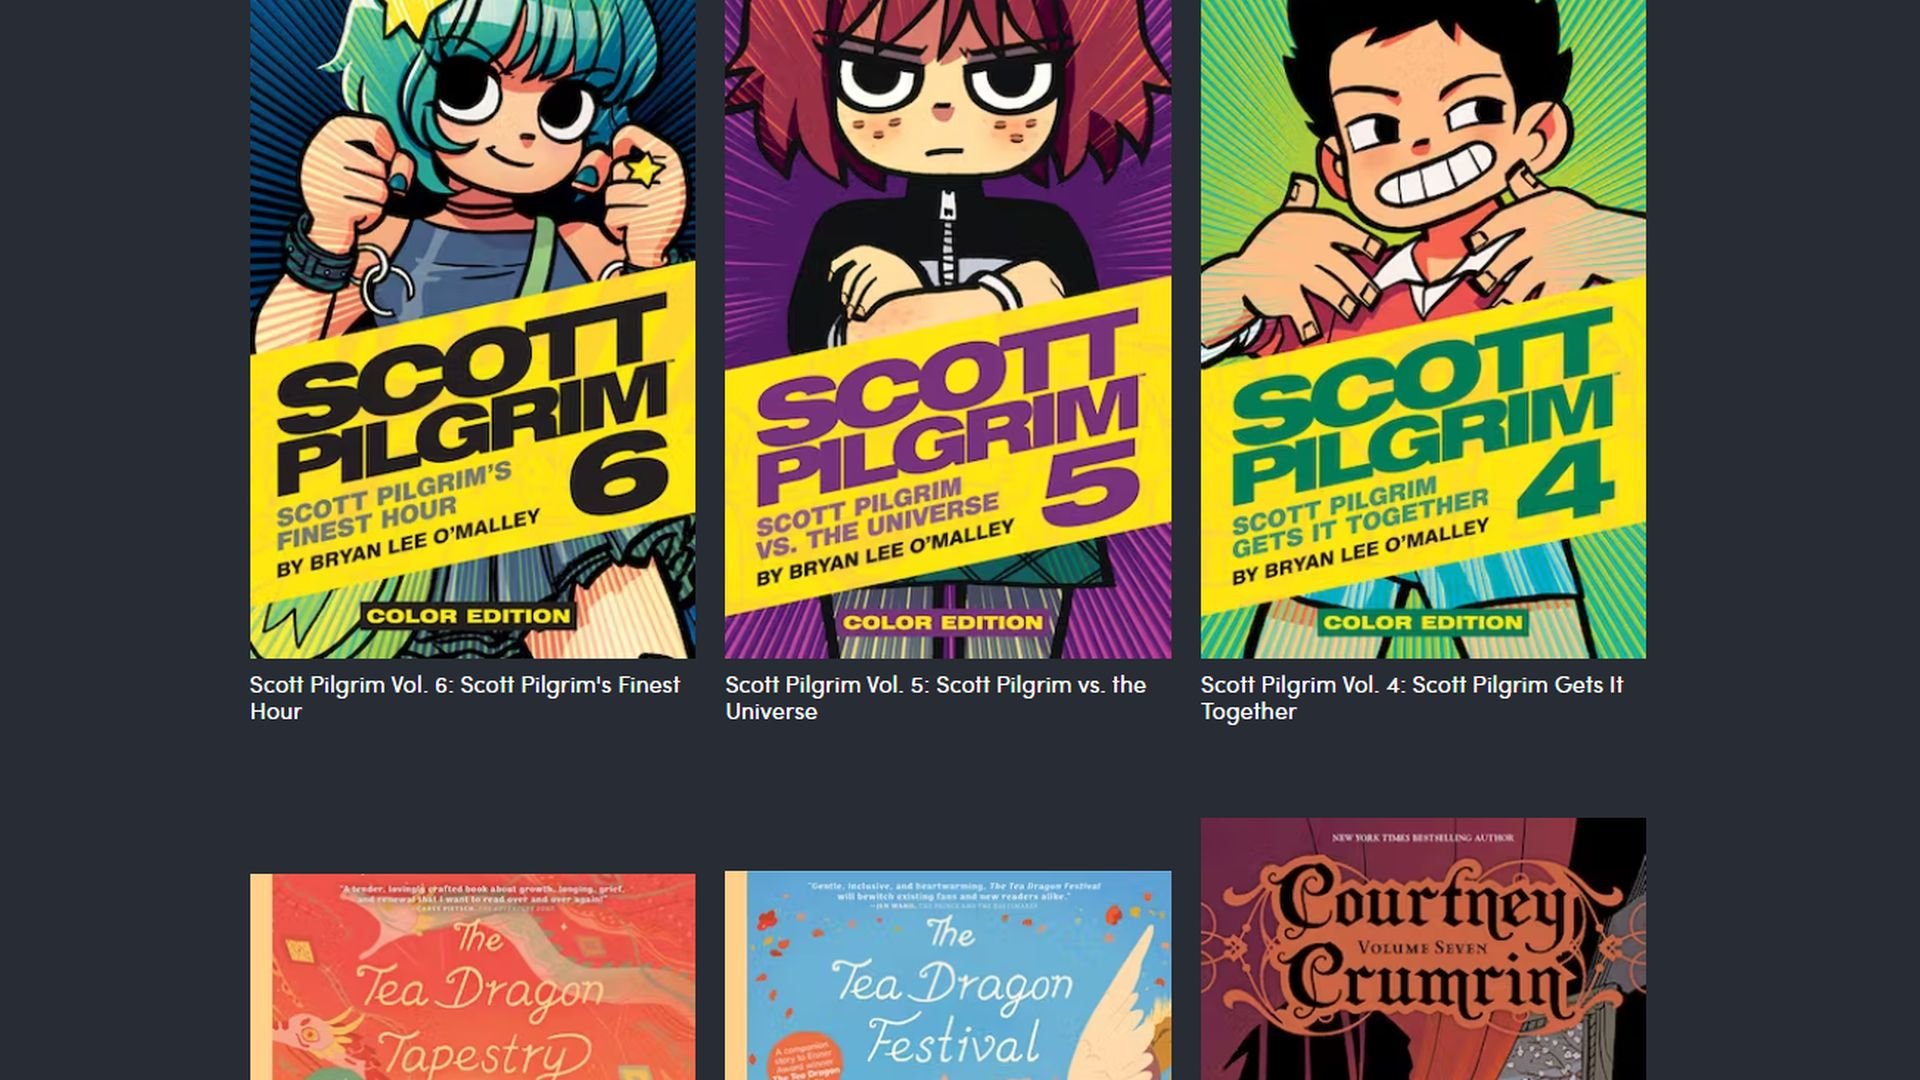 A Humble Bundle of all kinds of goods!